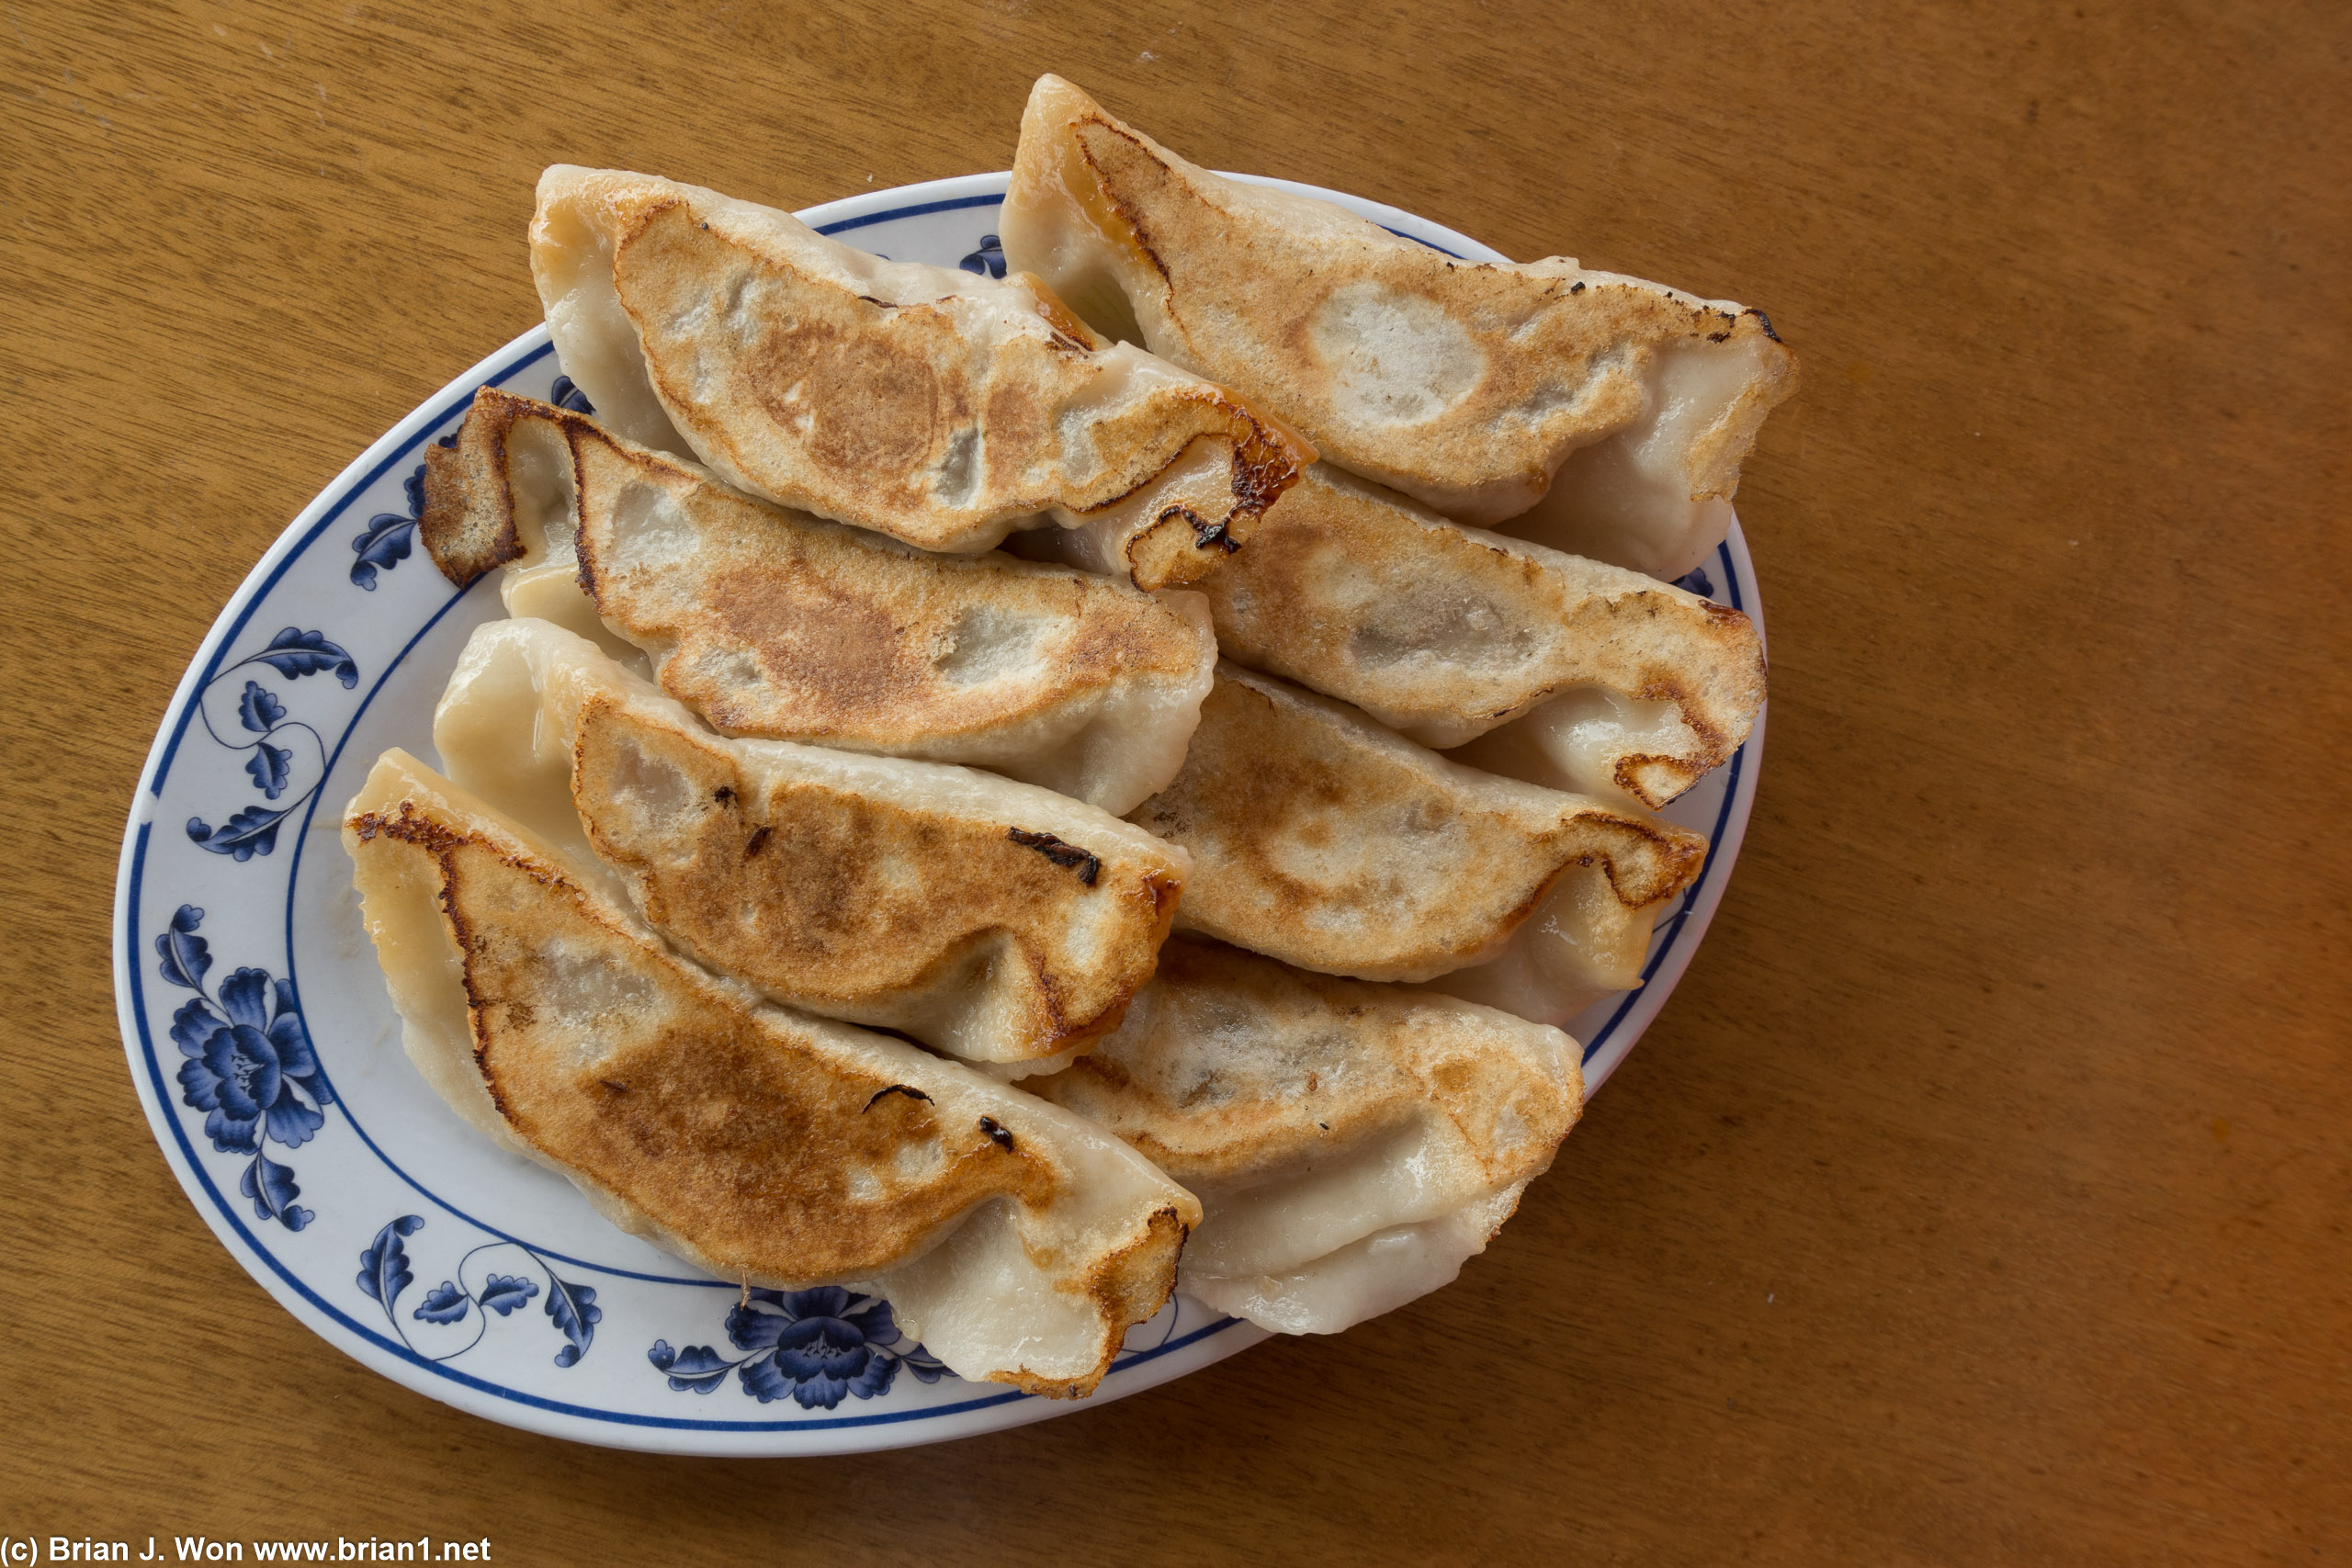 Potstickers were tasty. Would order again.